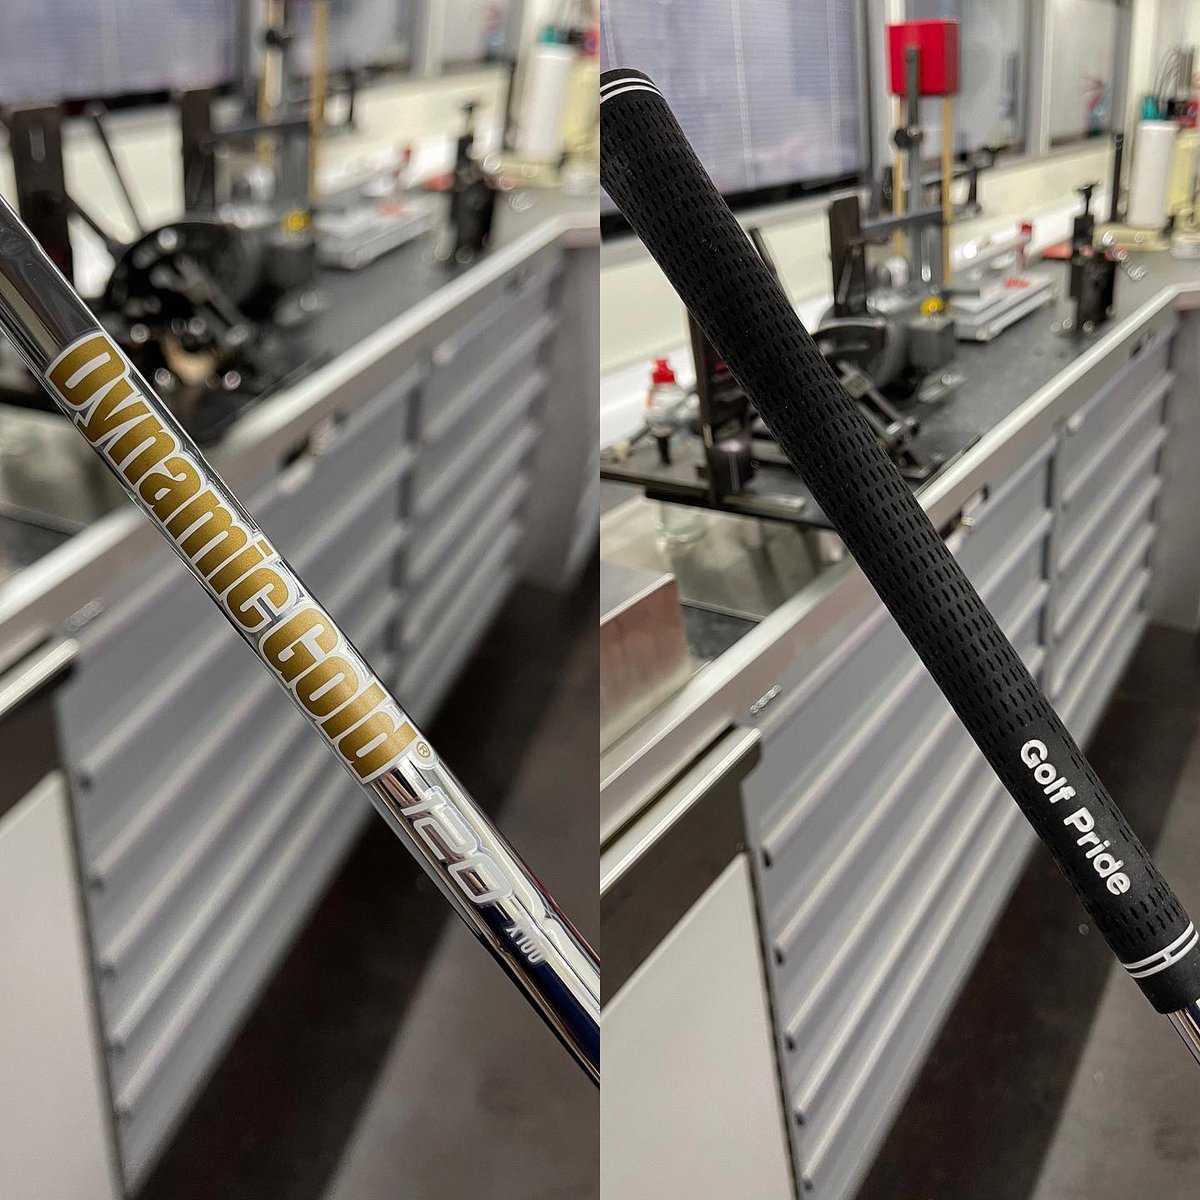 One of the builds last week for a German player, the New @WilsonGolf Staff Model Tour Sole 58° Wedge w/ a @truetempergolf DynamicGold 120 X100 & @golfpridegrips TourVelvet Ribbed Grip. 🇩🇪 ⚒️ #TeamWilson #Wilson #StaffModel #WilsonGolf